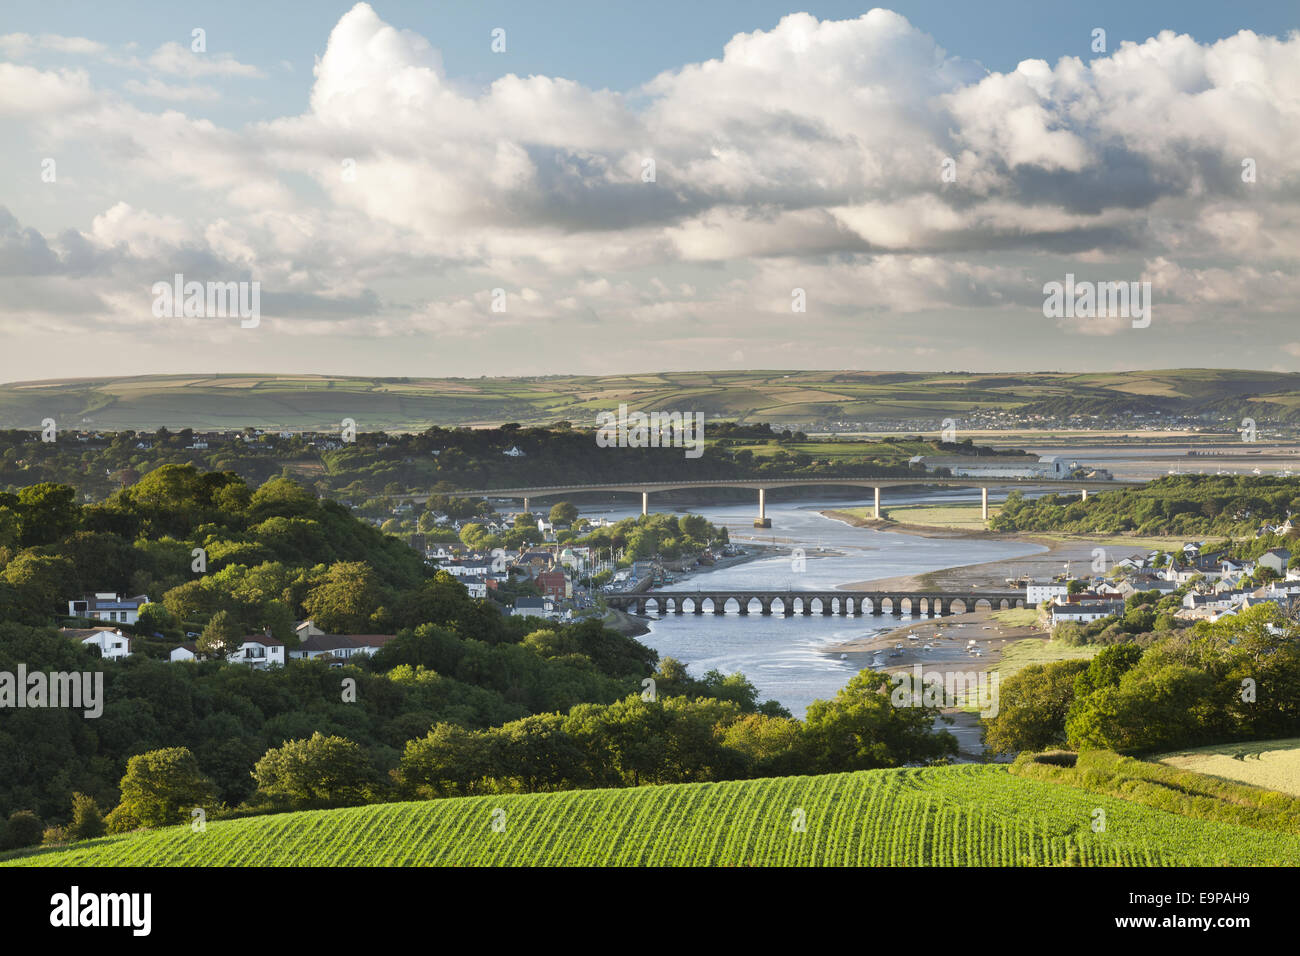 View of River Torridge winding through Bideford and under Bideford Old Bridge and then Torridge Bridge before merging with River Taw at Instow, viewed from hills above town on sunny summer evening, Bideford, North Devon, England, July Stock Photo